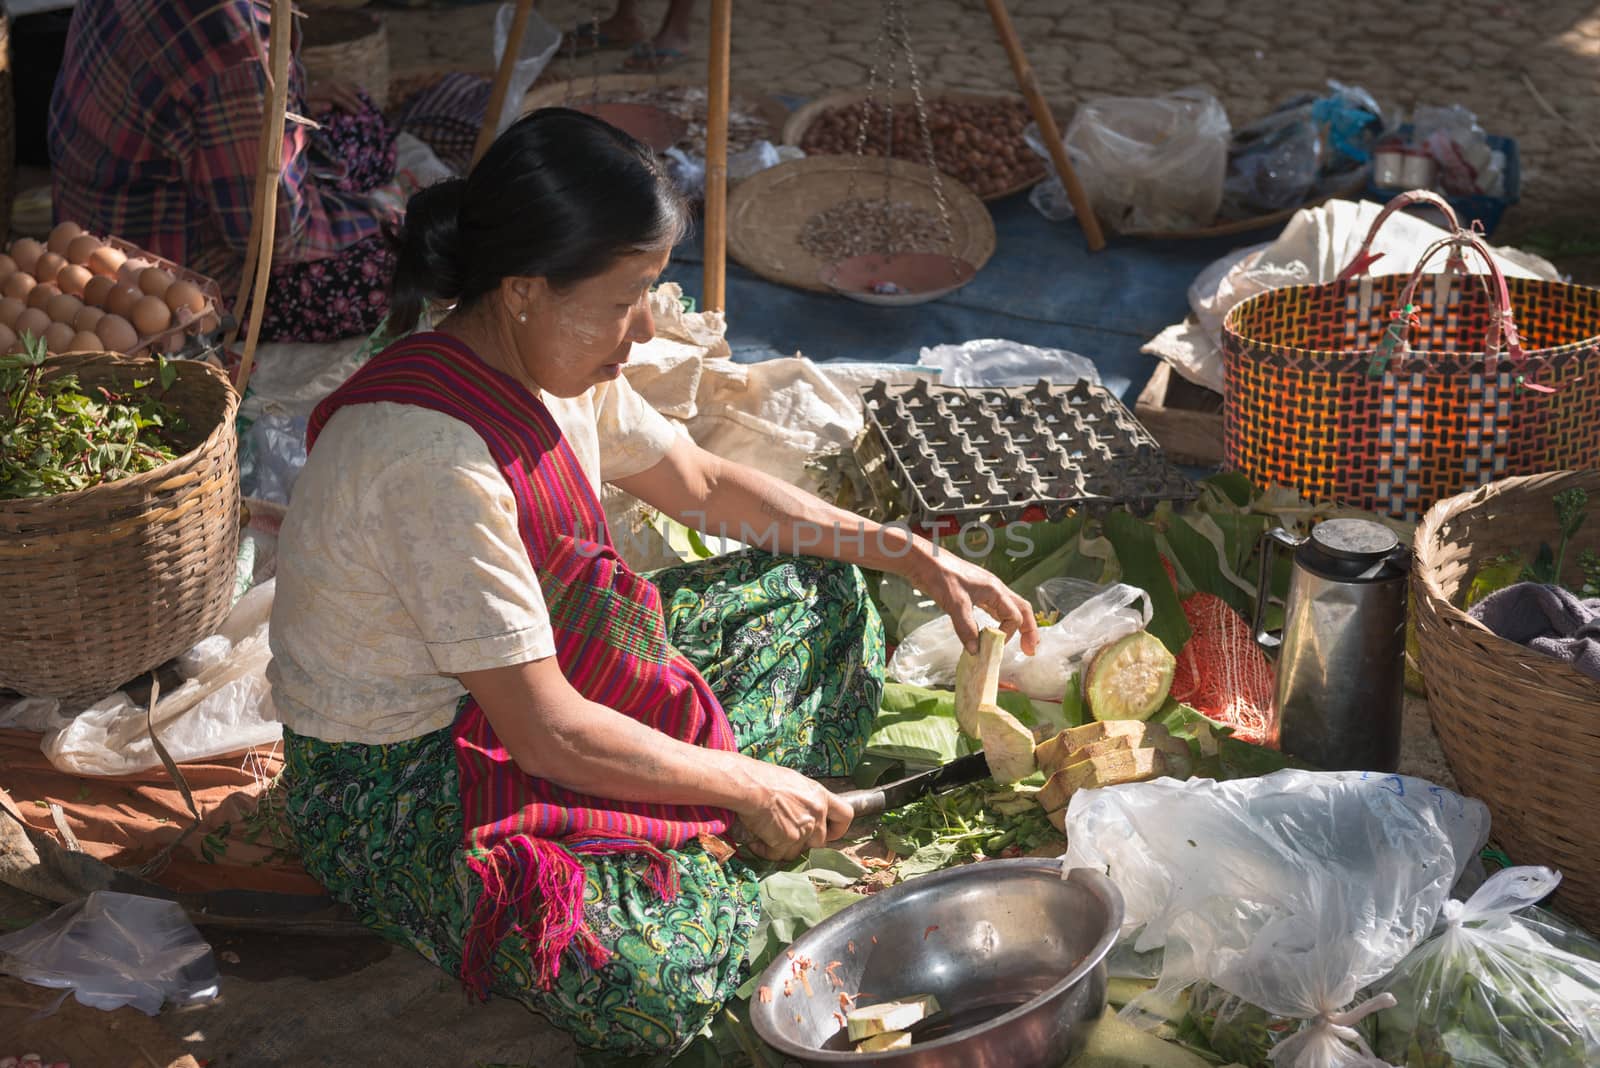 INLE LAKE, MYANMAR (BURMA) - 07 JAN 2014: Local Burmese Intha woman cut and sell vegetable on a traditional open market. Local markets serves most common shopping needs Inle Lake people.